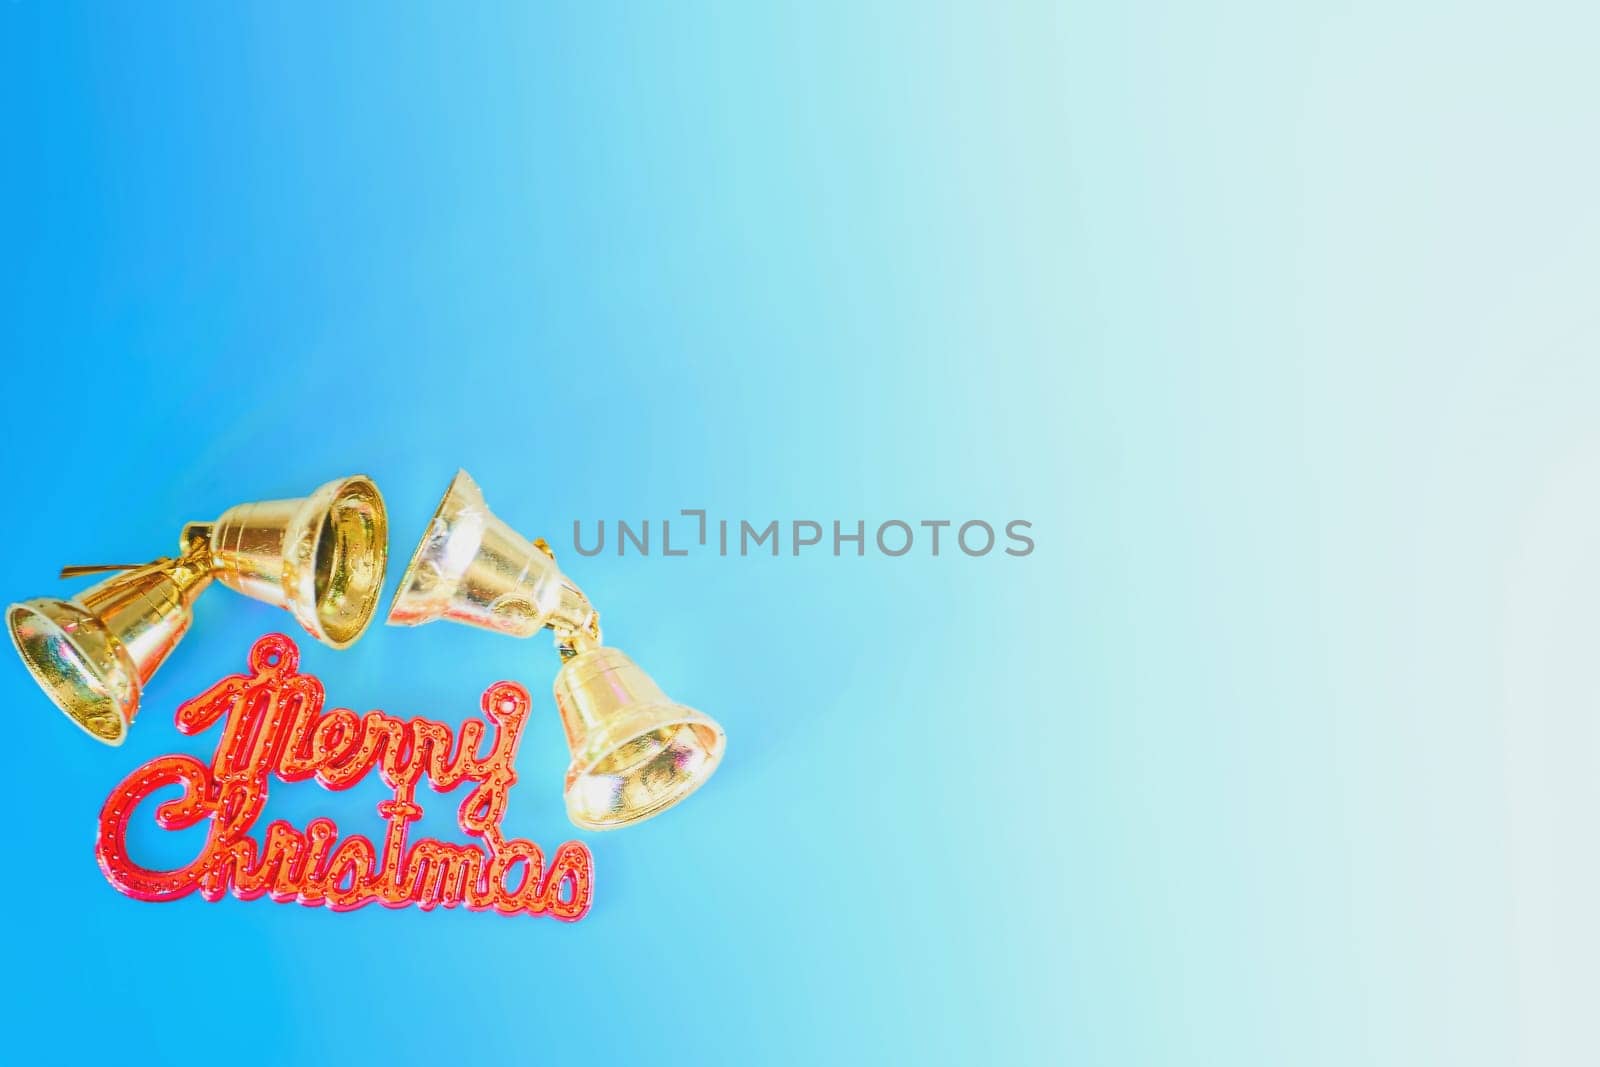 Merry Christmas inscription and golden bells on a blue background by jovani68